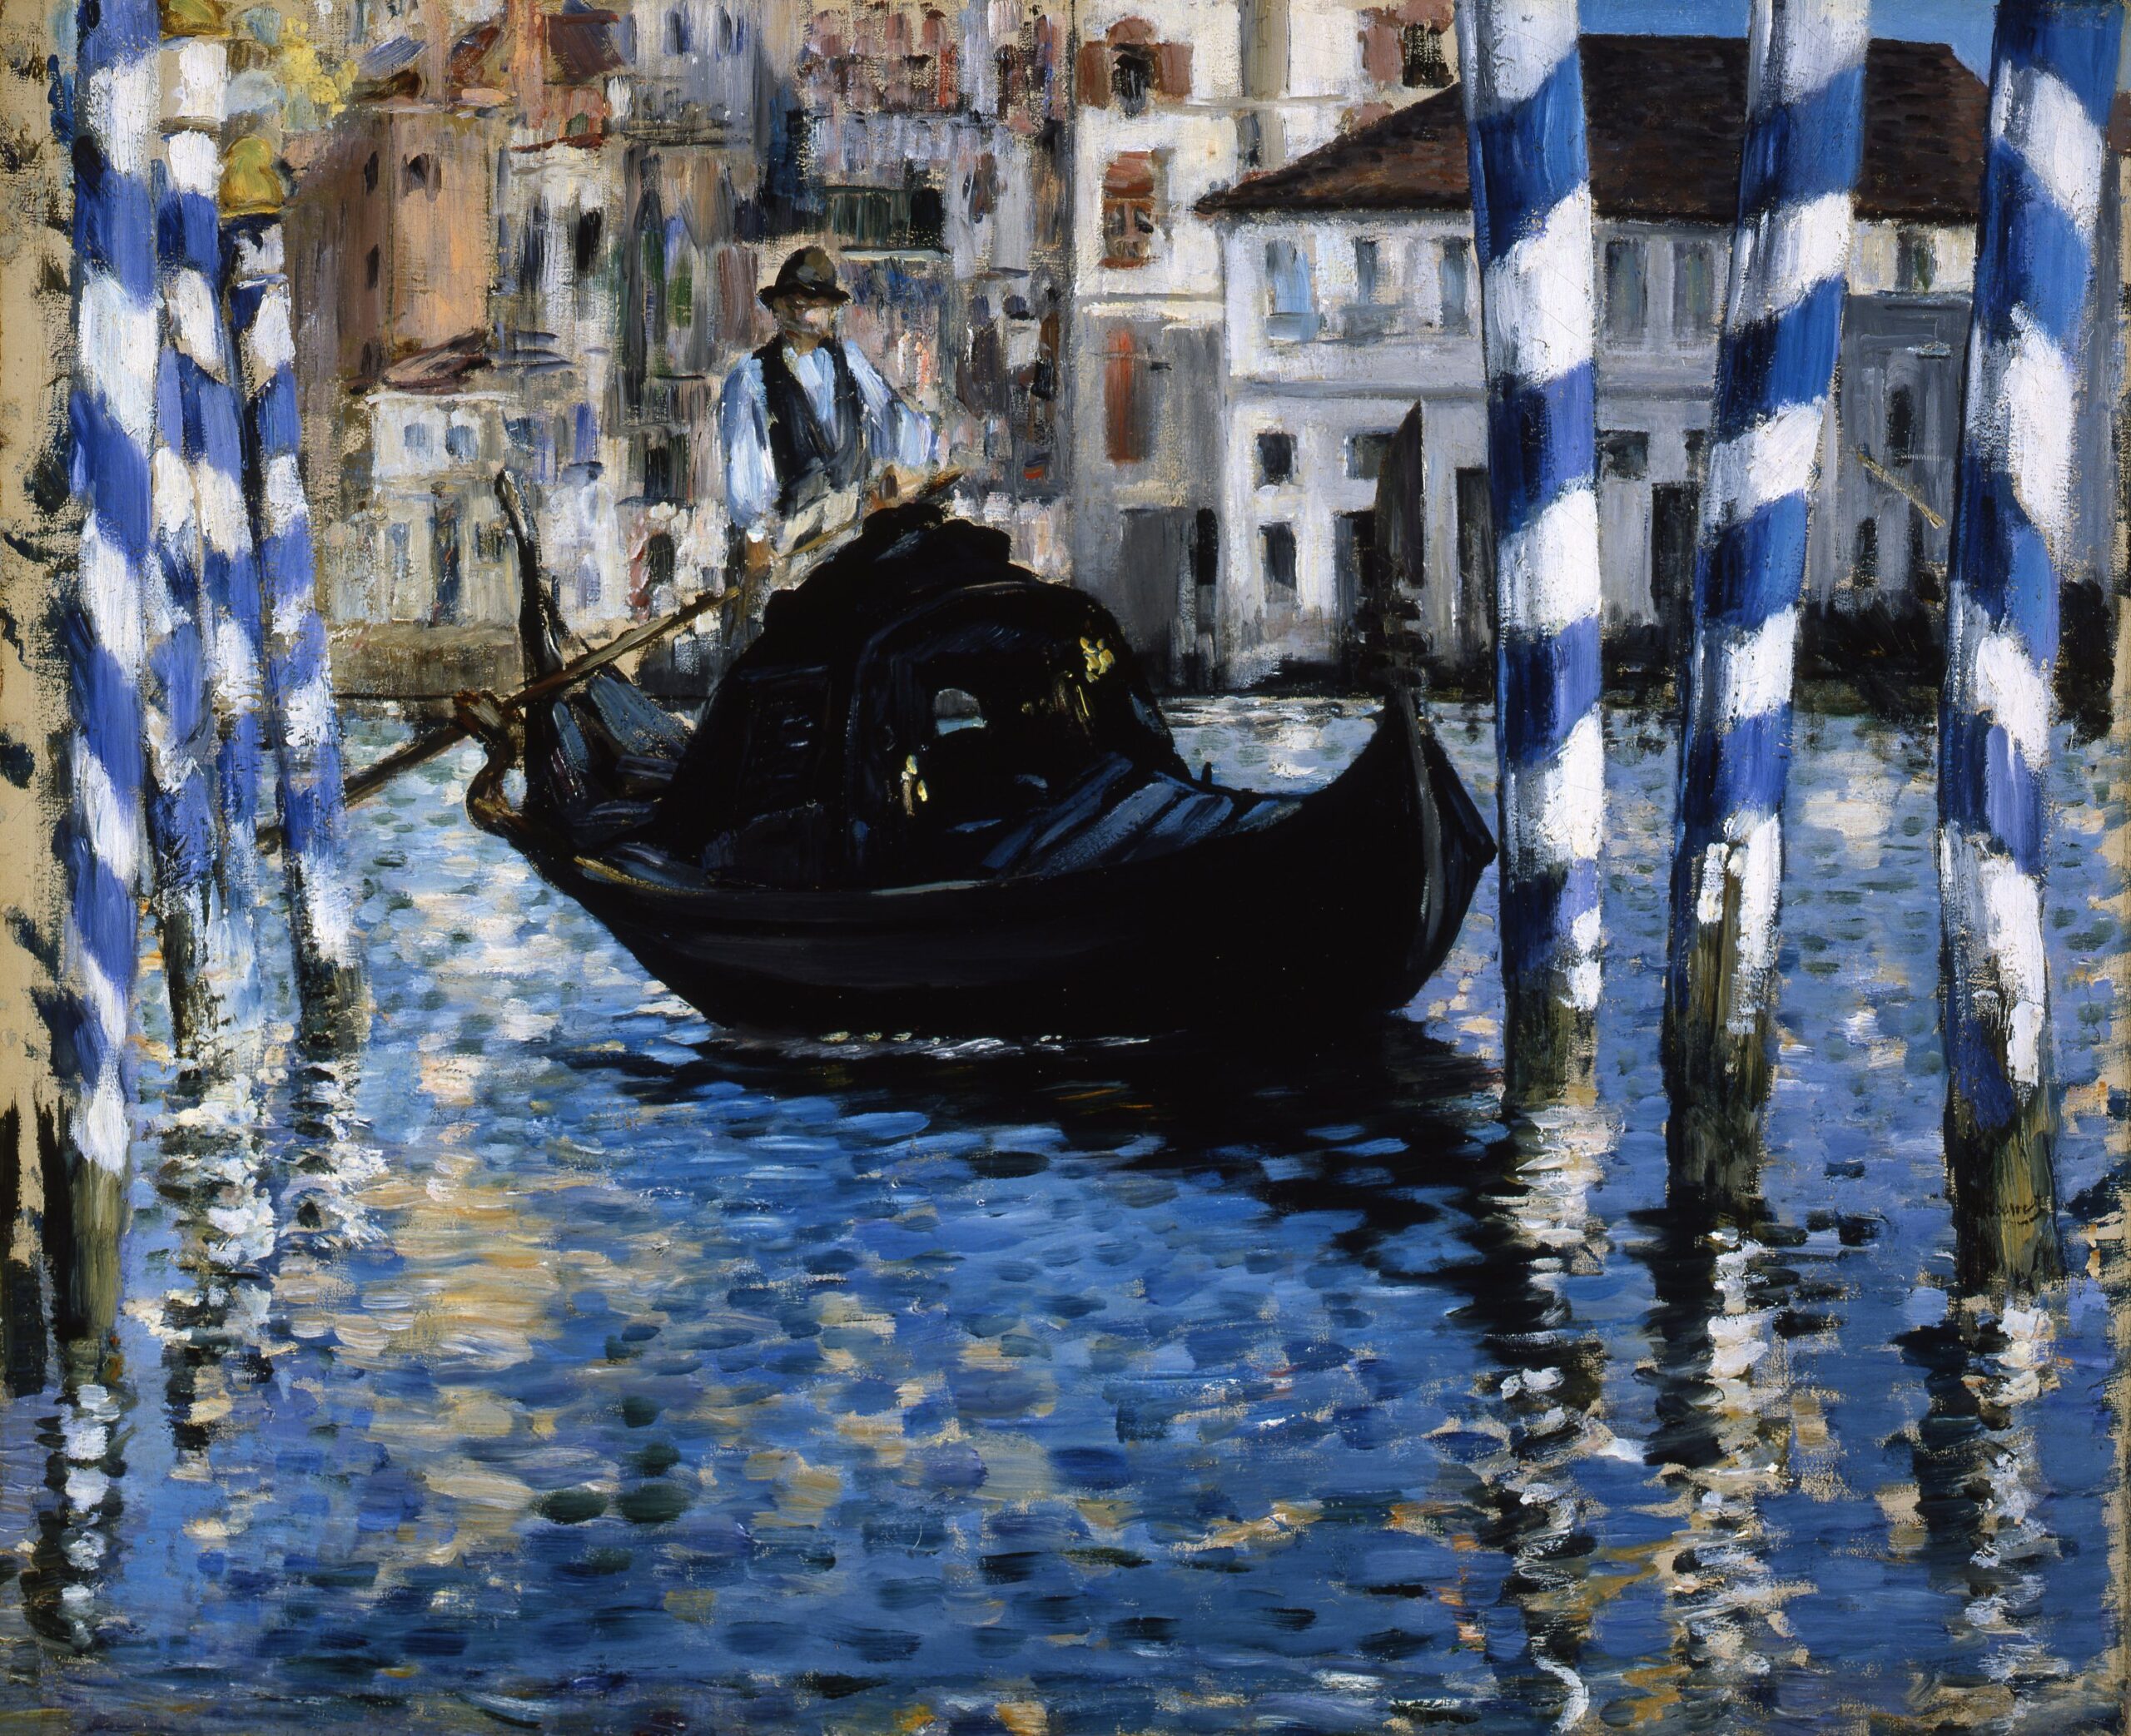 Both surrounding by blue and white striped poles in the water canals of Venice